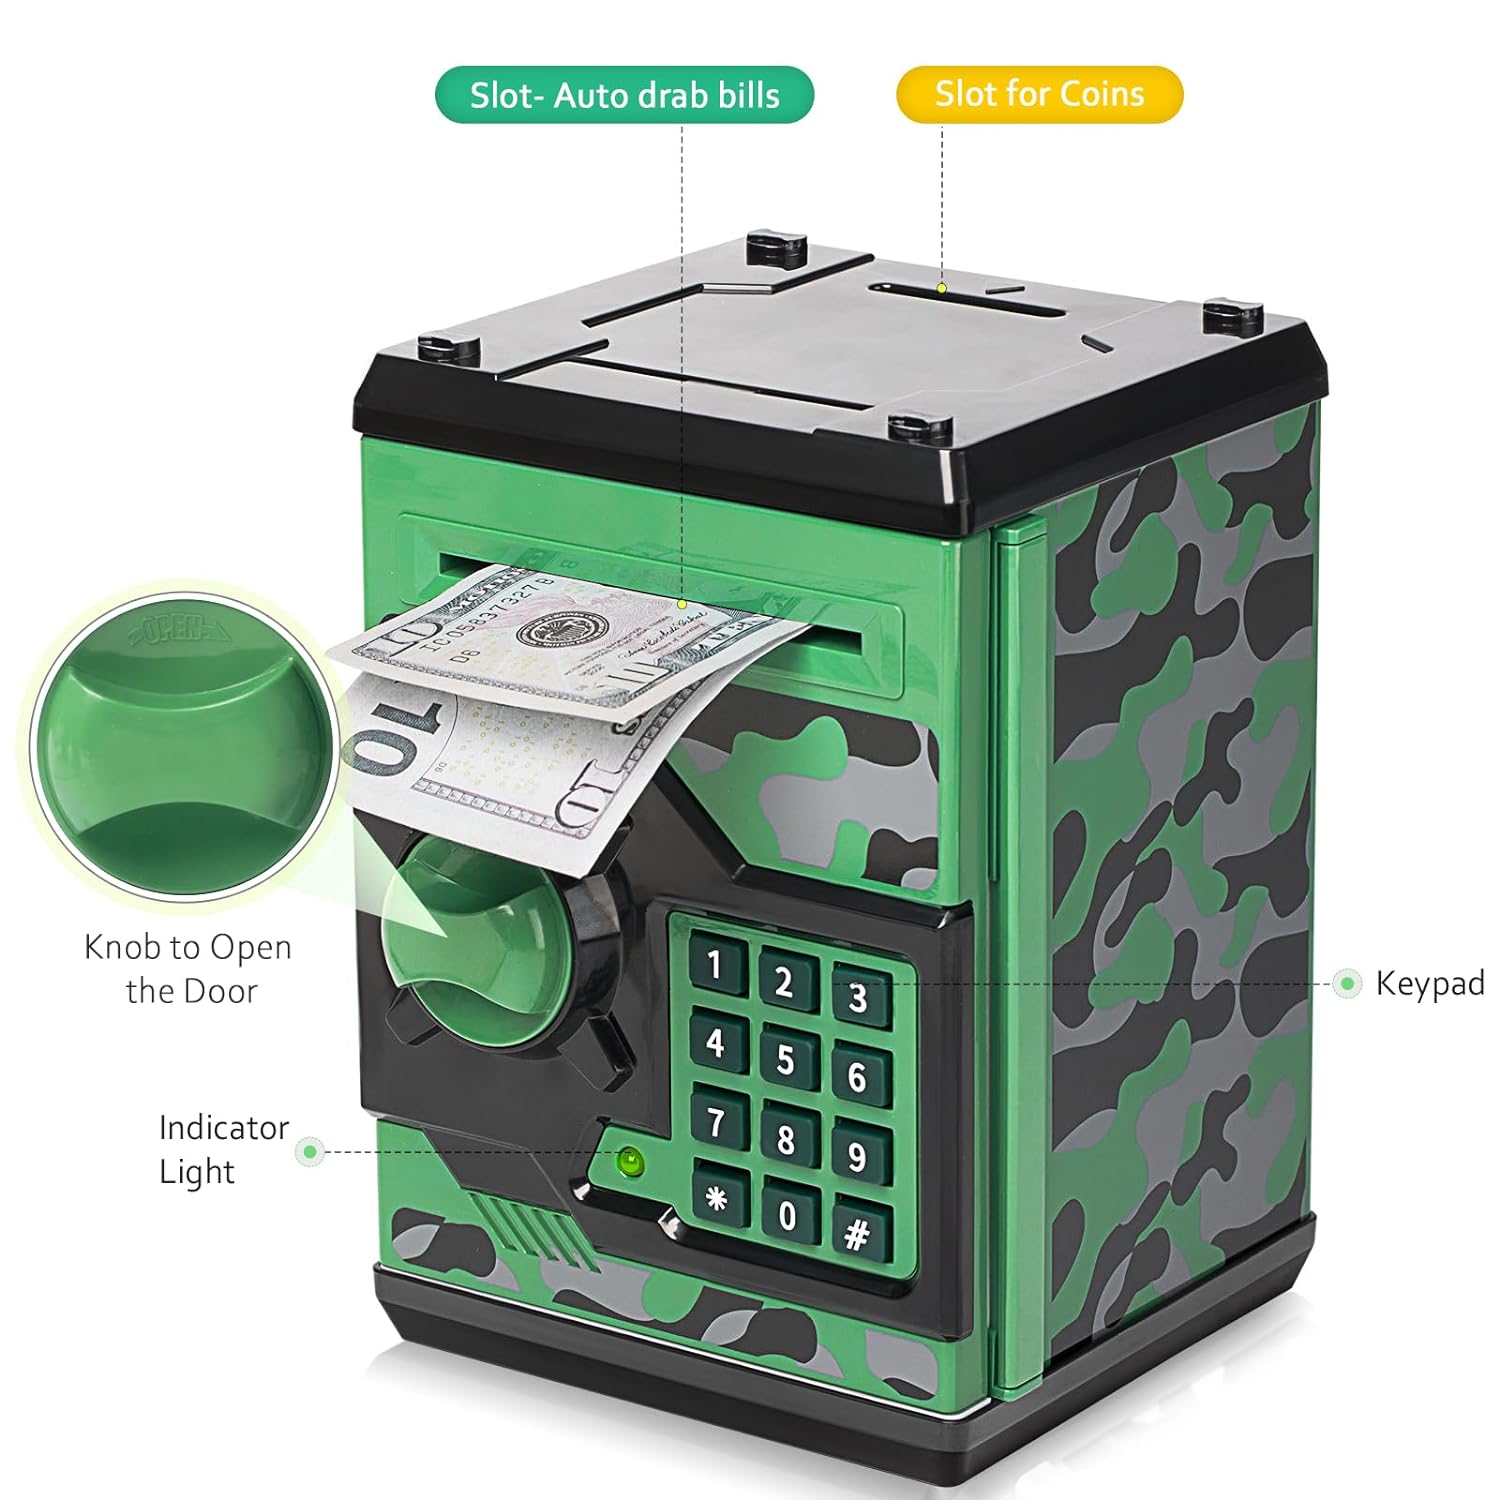 ATM Piggy Bank for Boys Girls, Vcertcpl Mini ATM Coin Bank Money Saving Box with Password, Kids Safe Money Jar for Adults with Auto Grab Bill Slot, Great Gift Toy Bank for Kids(Camouflage Green/Gray)